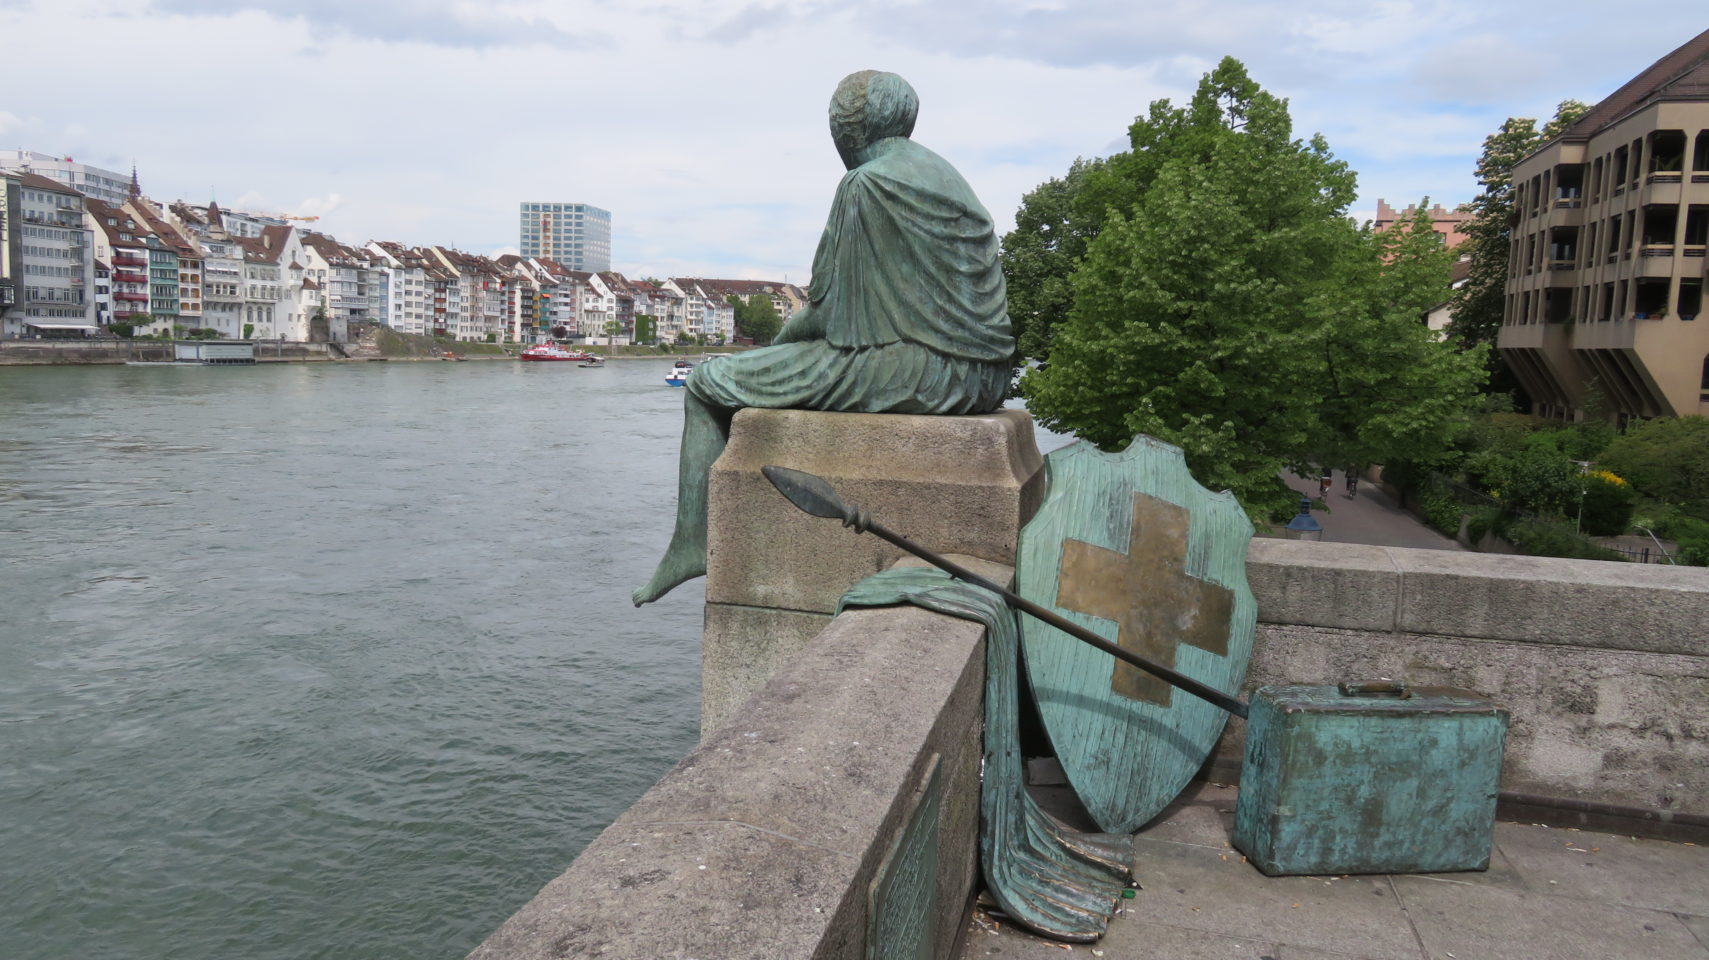 Helvetia on the Journey by Bettina Eichin on the terrace of the Mittlere Brucke in Basel Switzerland